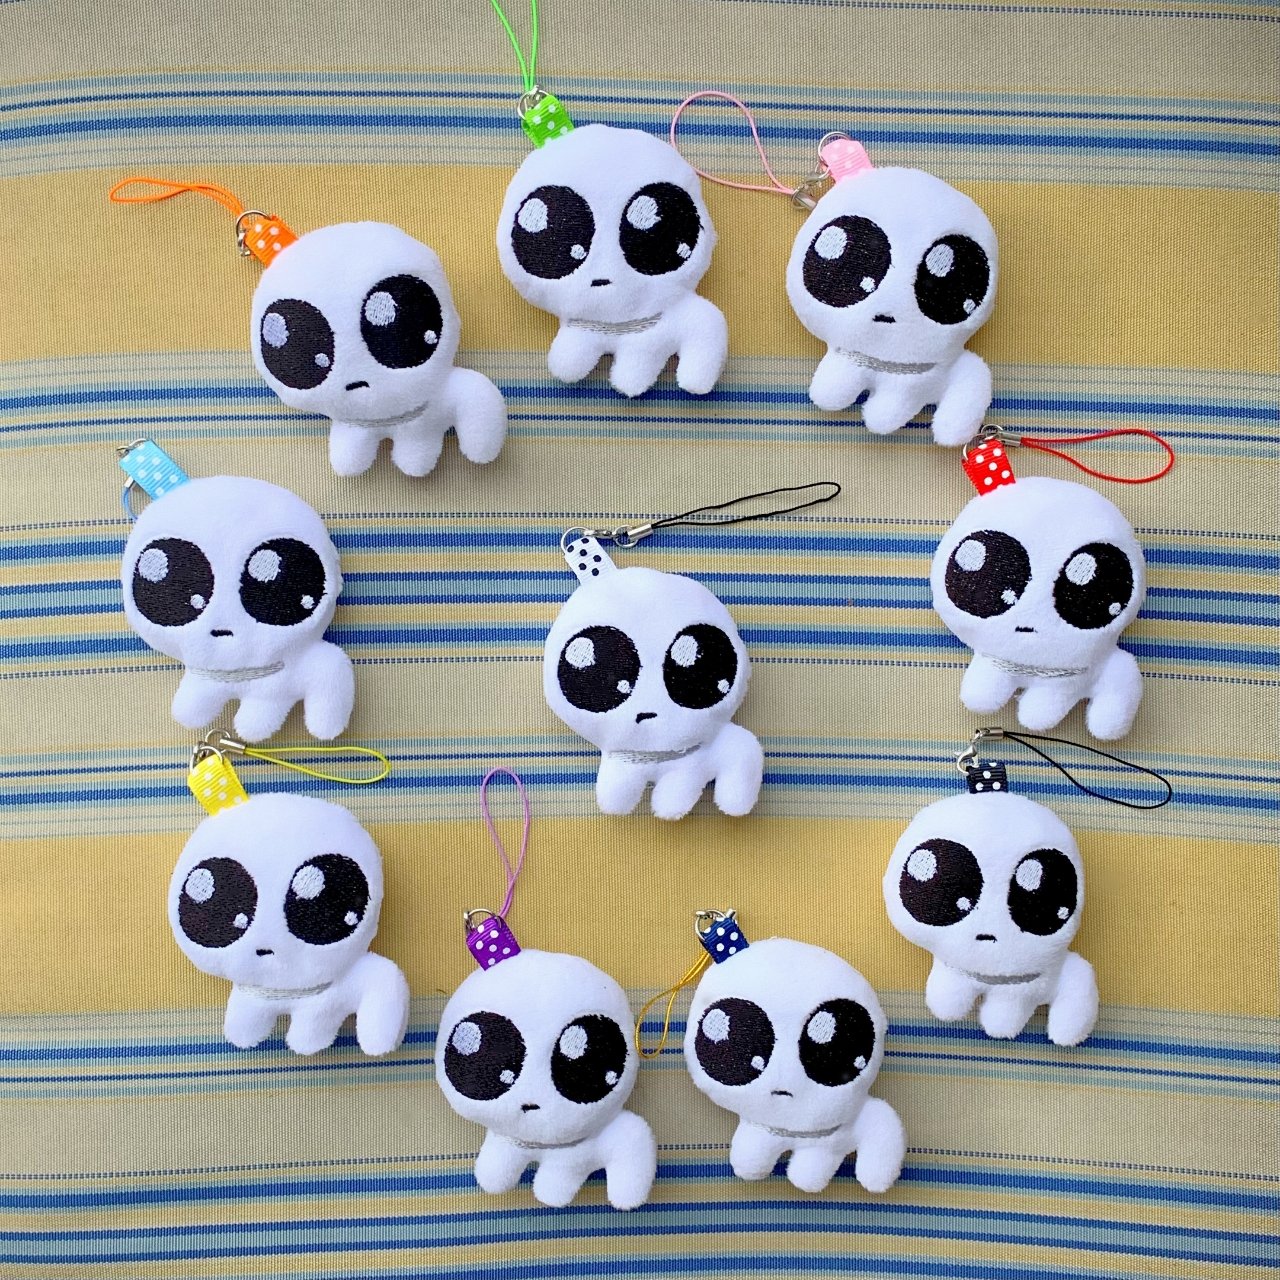 🪦🦇𝖙𝖔𝖞𝖍𝖆𝖚𝖓𝖙🦇🪦 on X: tbh creature plushie charms for sale!!!  link in bio and also below!! 🤍 🤍 this has been a  super fun collab between @rainbowplush 's and me. we're so excited